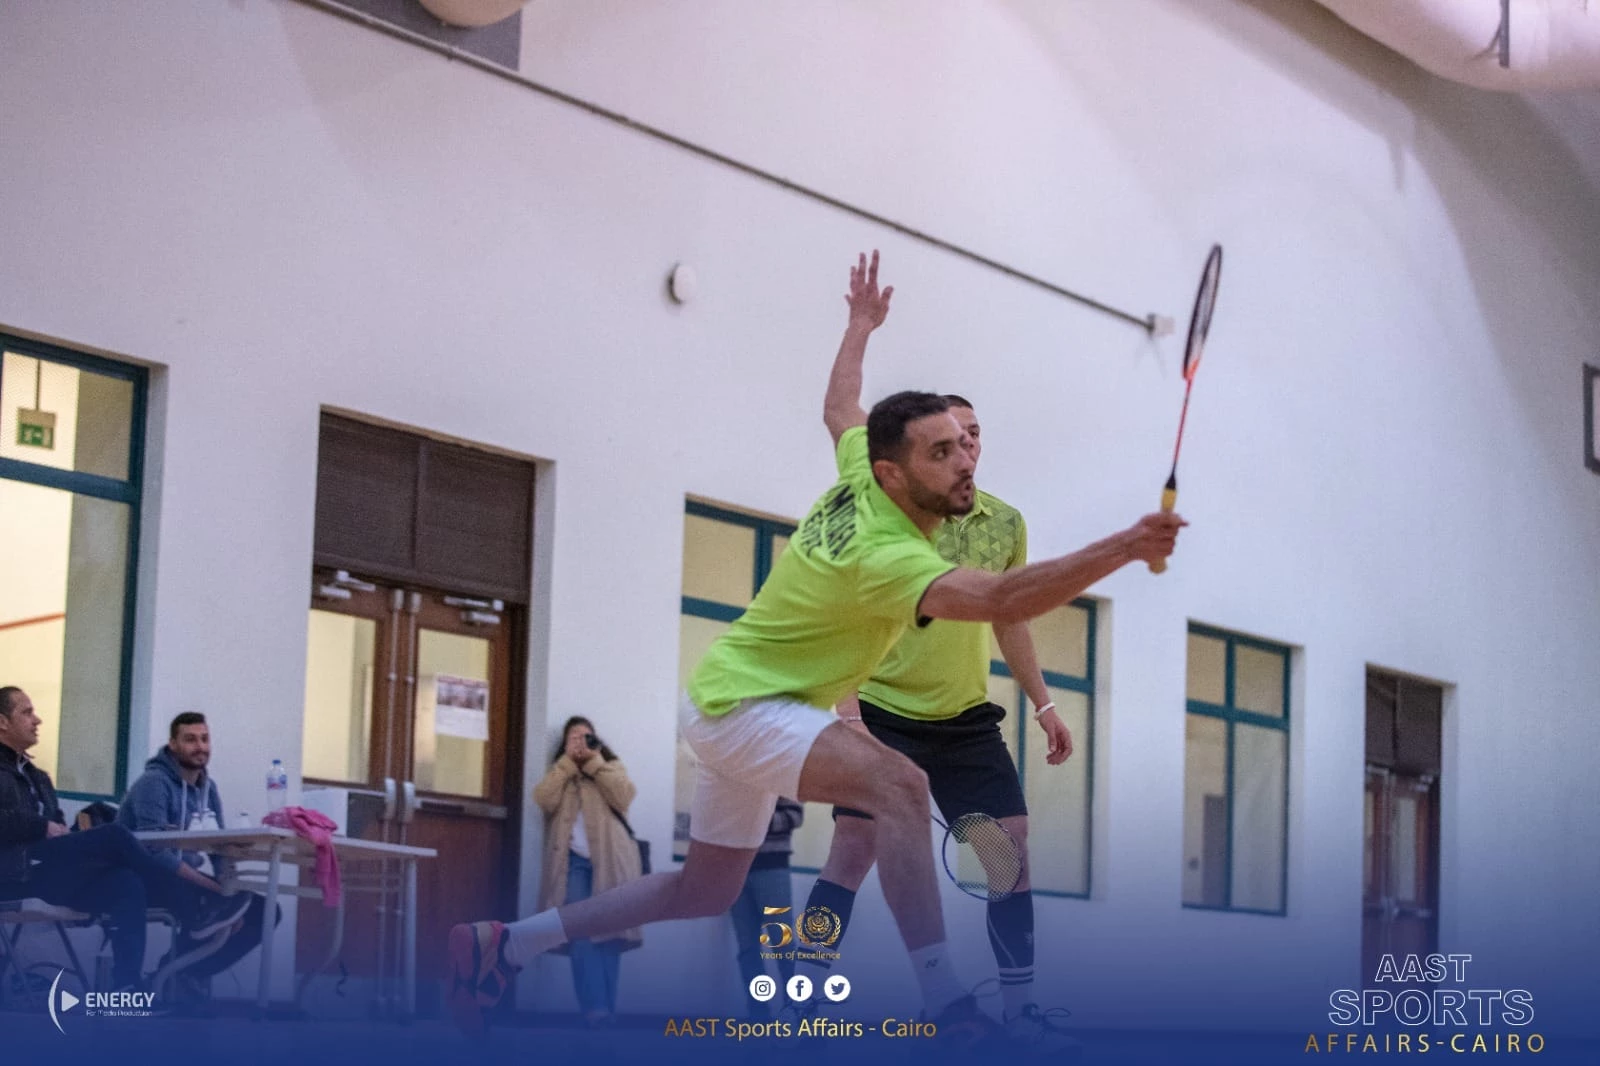 The national team of the Academy in Cairo for badminton is crowned the champion of the student championship and the runner-up of the student championship of the fifth sector of private universities4